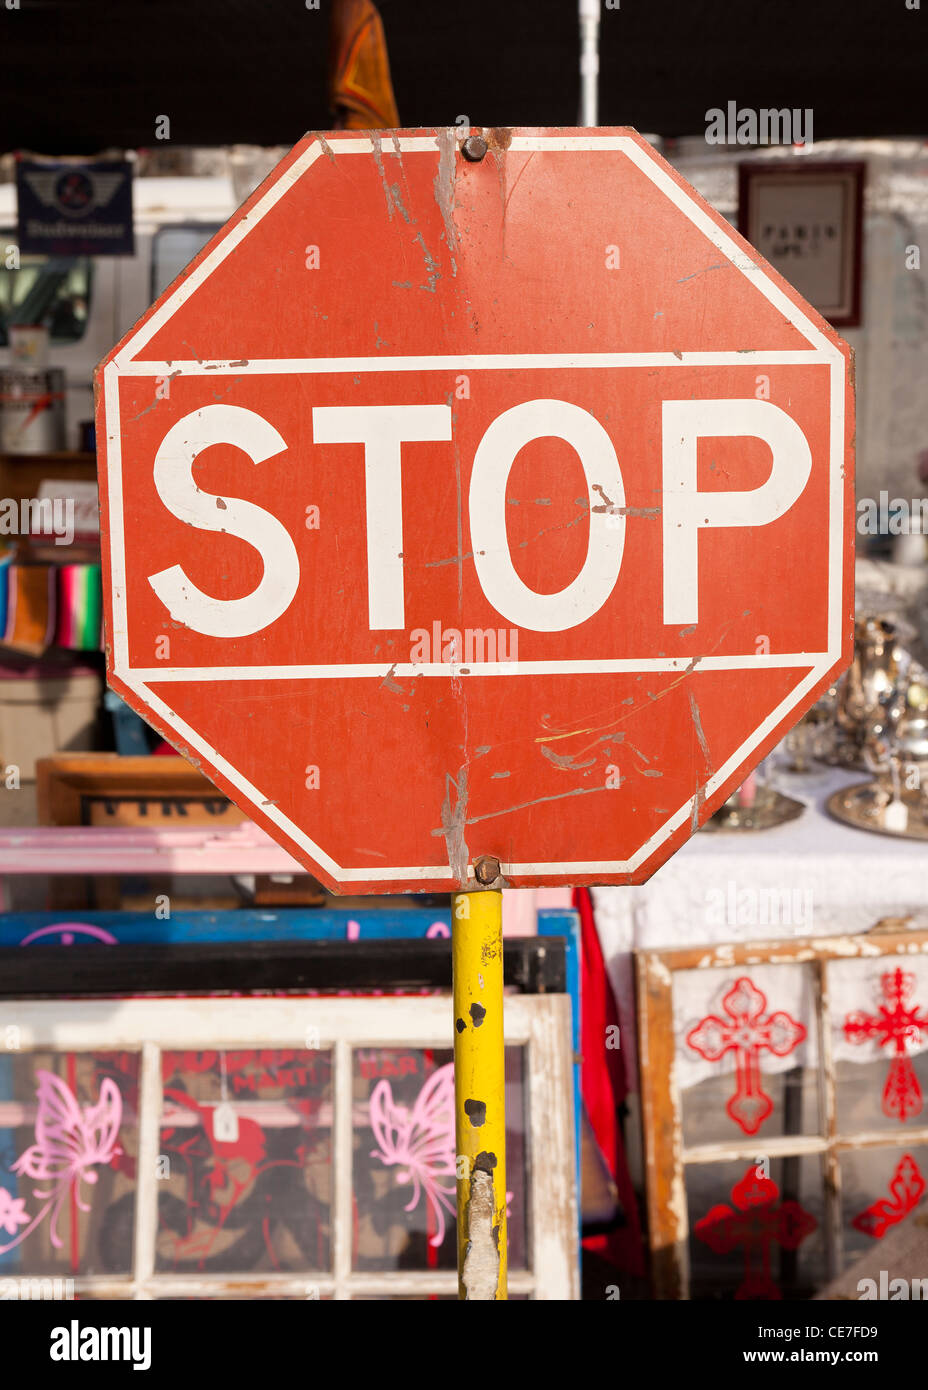 Antique stop sign Stock Photo